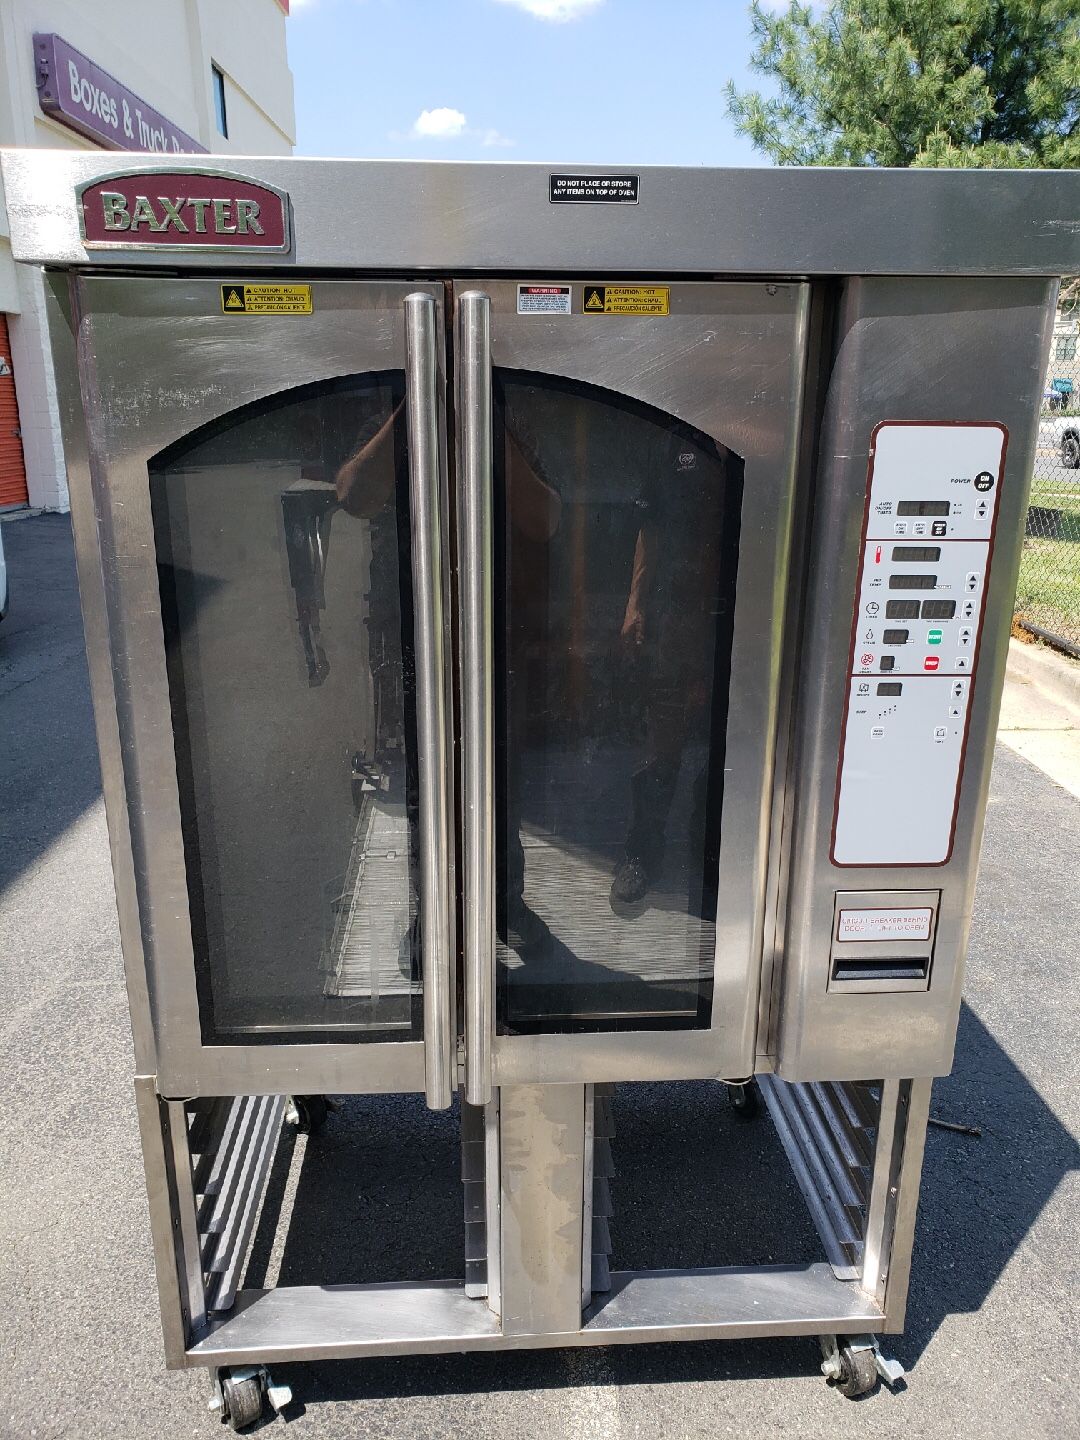 Baxter commercial conviction oven